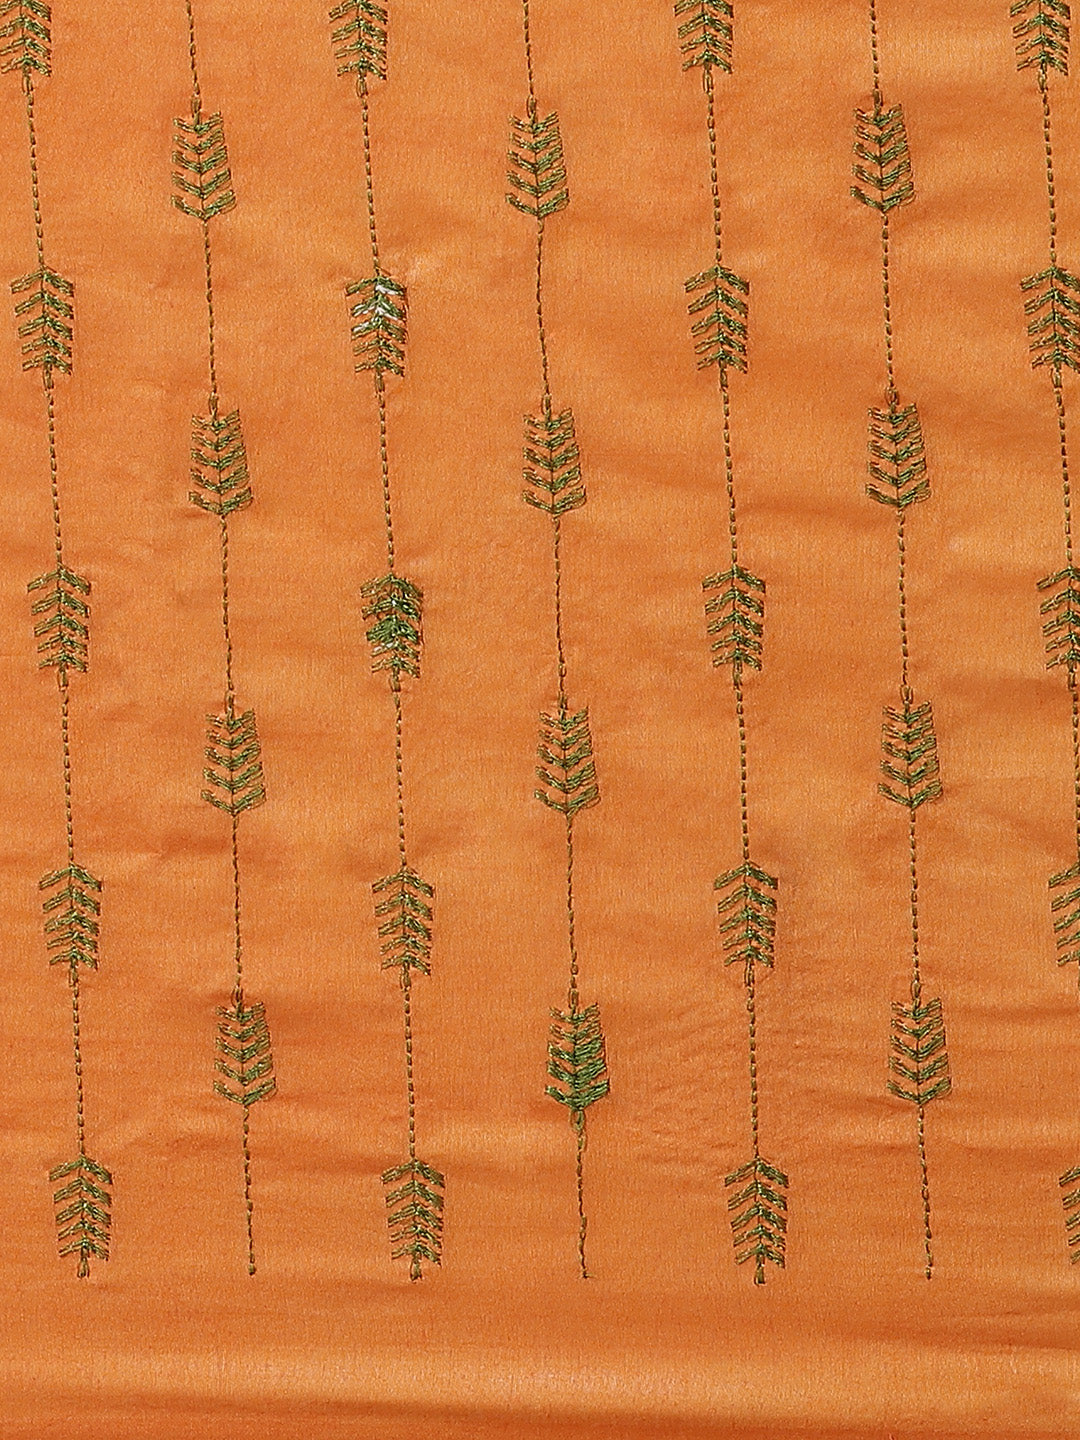 Off White and Gold, Kalakari India Bhagalpuri Silk Blend Woven Design Saree with Blouse ALBGSA0110-Saree-Kalakari India-ALBGSA0110-Bhagalpuri, Geographical Indication, Hand Crafted, Heritage Prints, Jute, Natural Dyes, Red, Sarees, Silk Blend, Sustainable Fabrics, Woven, Yellow-[Linen,Ethnic,wear,Fashionista,Handloom,Handicraft,Indigo,blockprint,block,print,Cotton,Chanderi,Blue, latest,classy,party,bollywood,trendy,summer,style,traditional,formal,elegant,unique,style,hand,block,print, dabu,booti